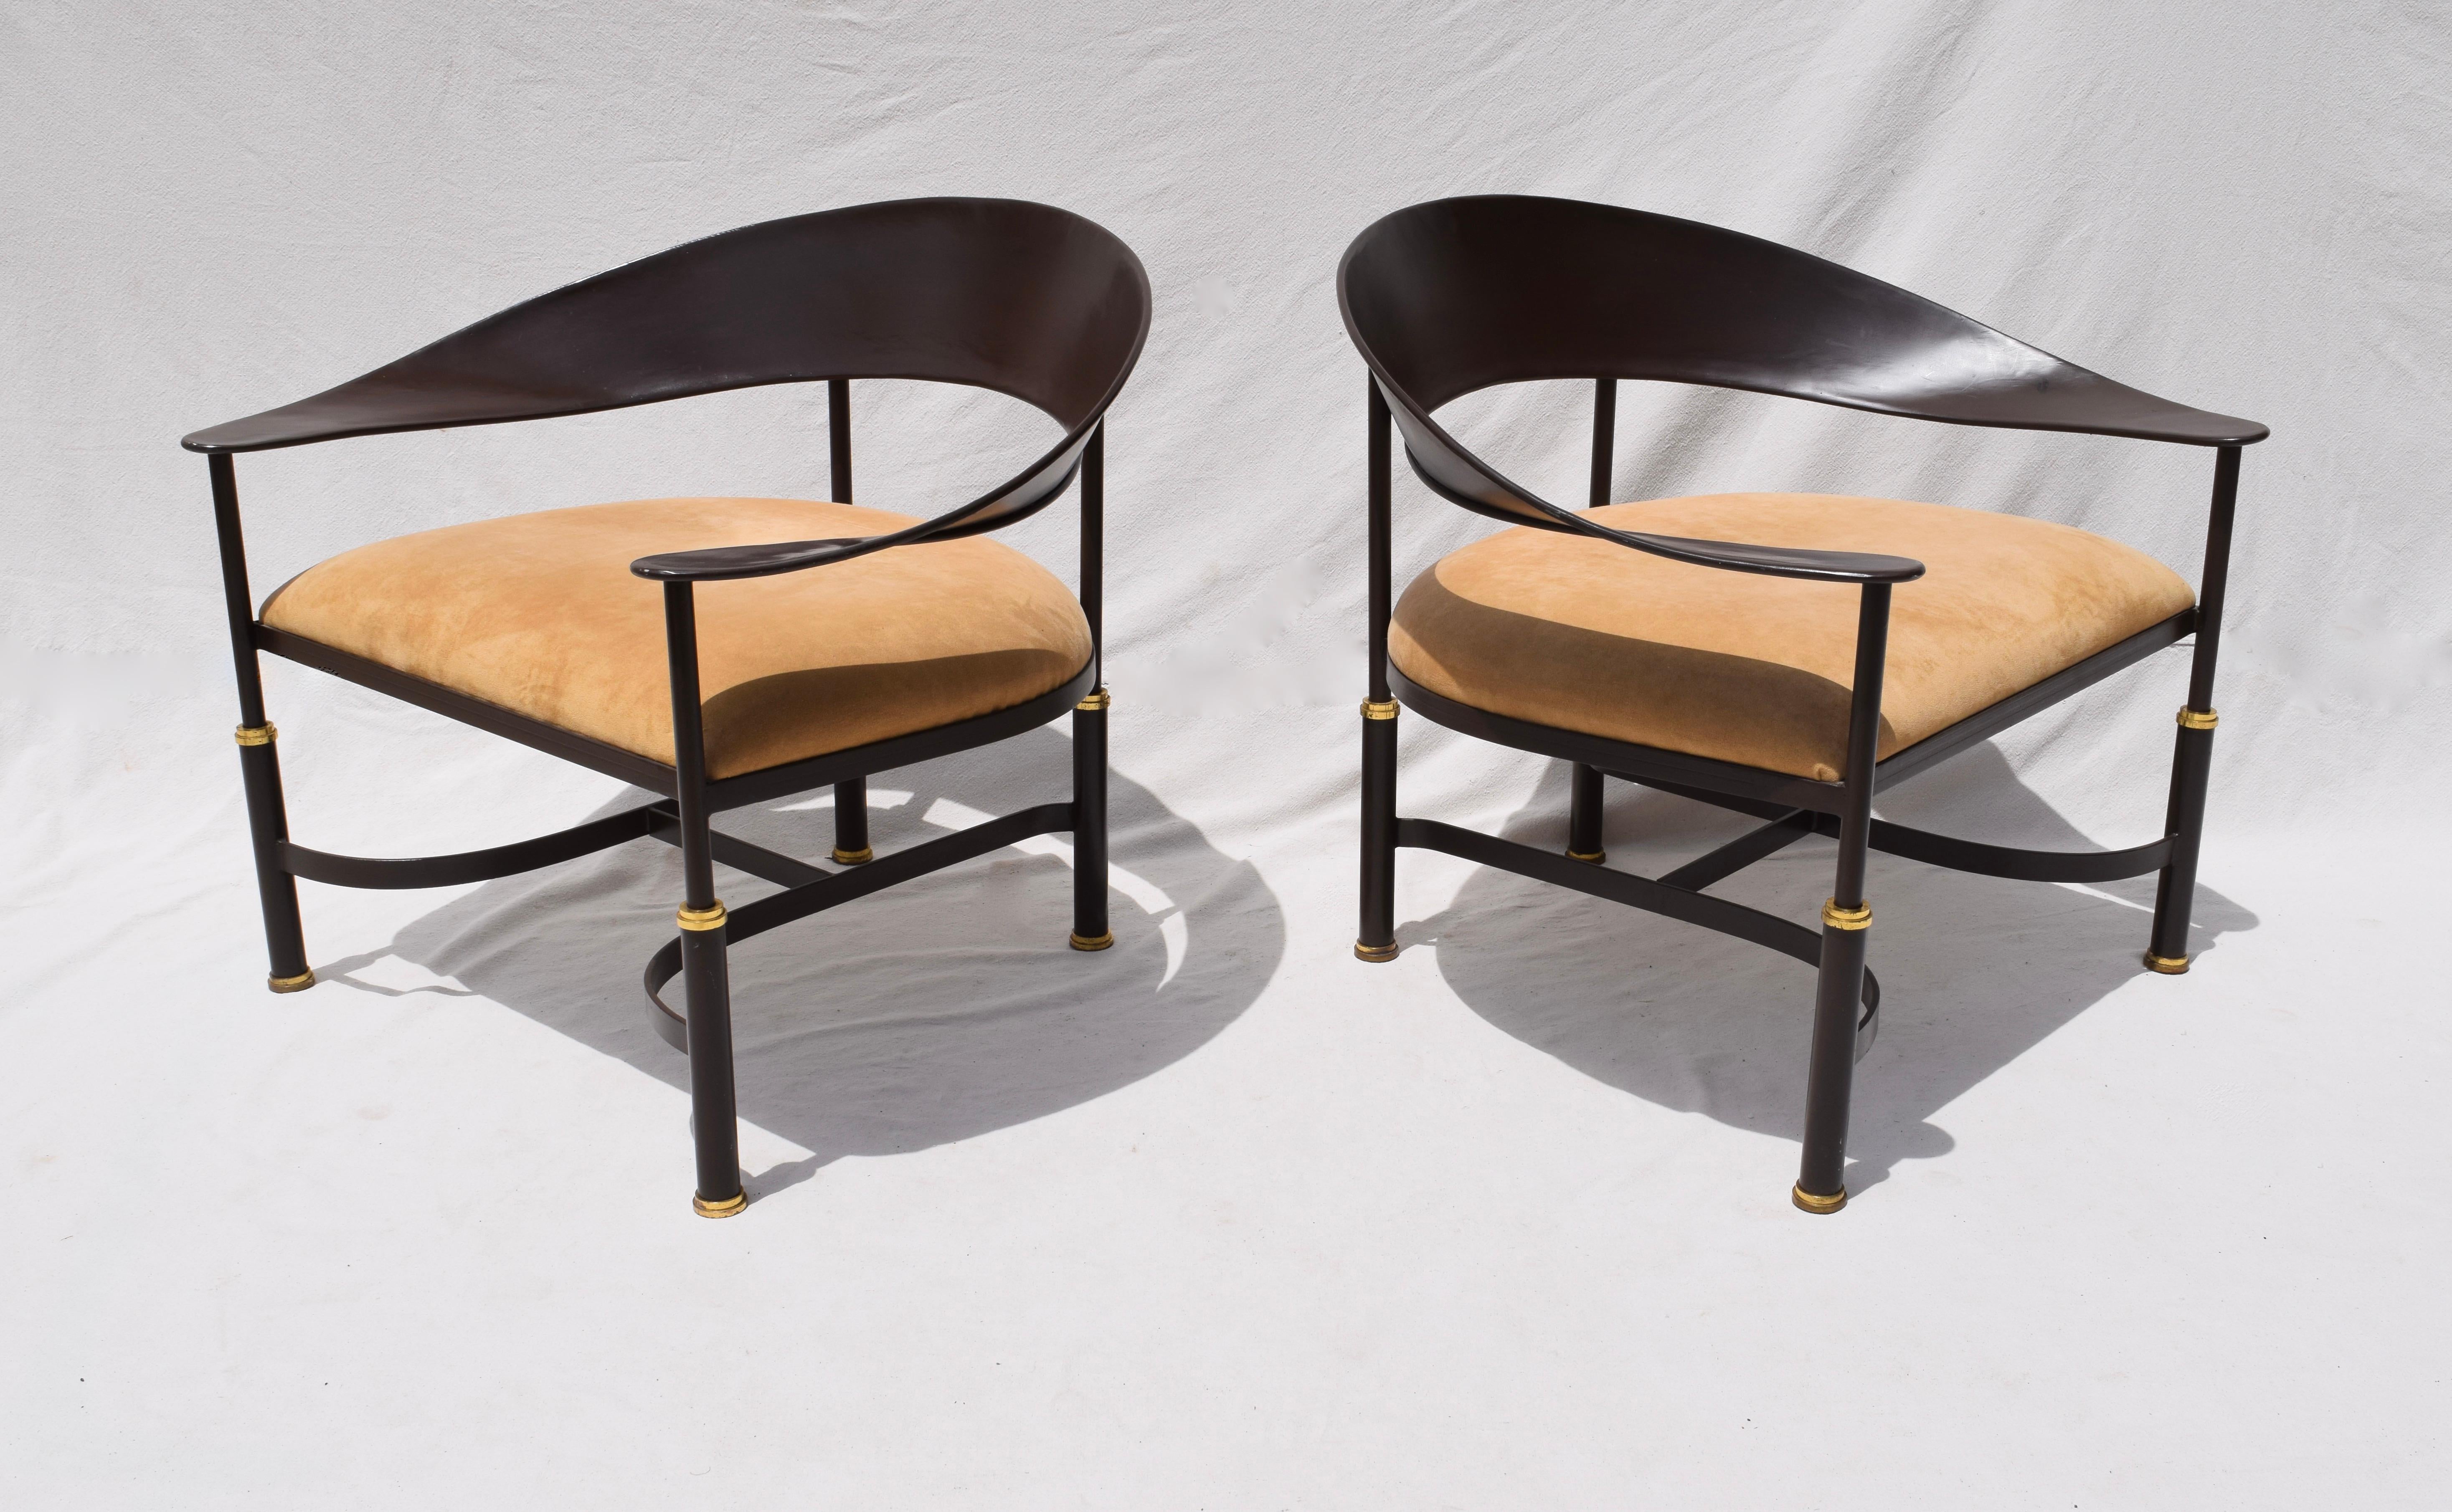 Forged 1980s Buying and Design Modern Chairs, Florence, Italy